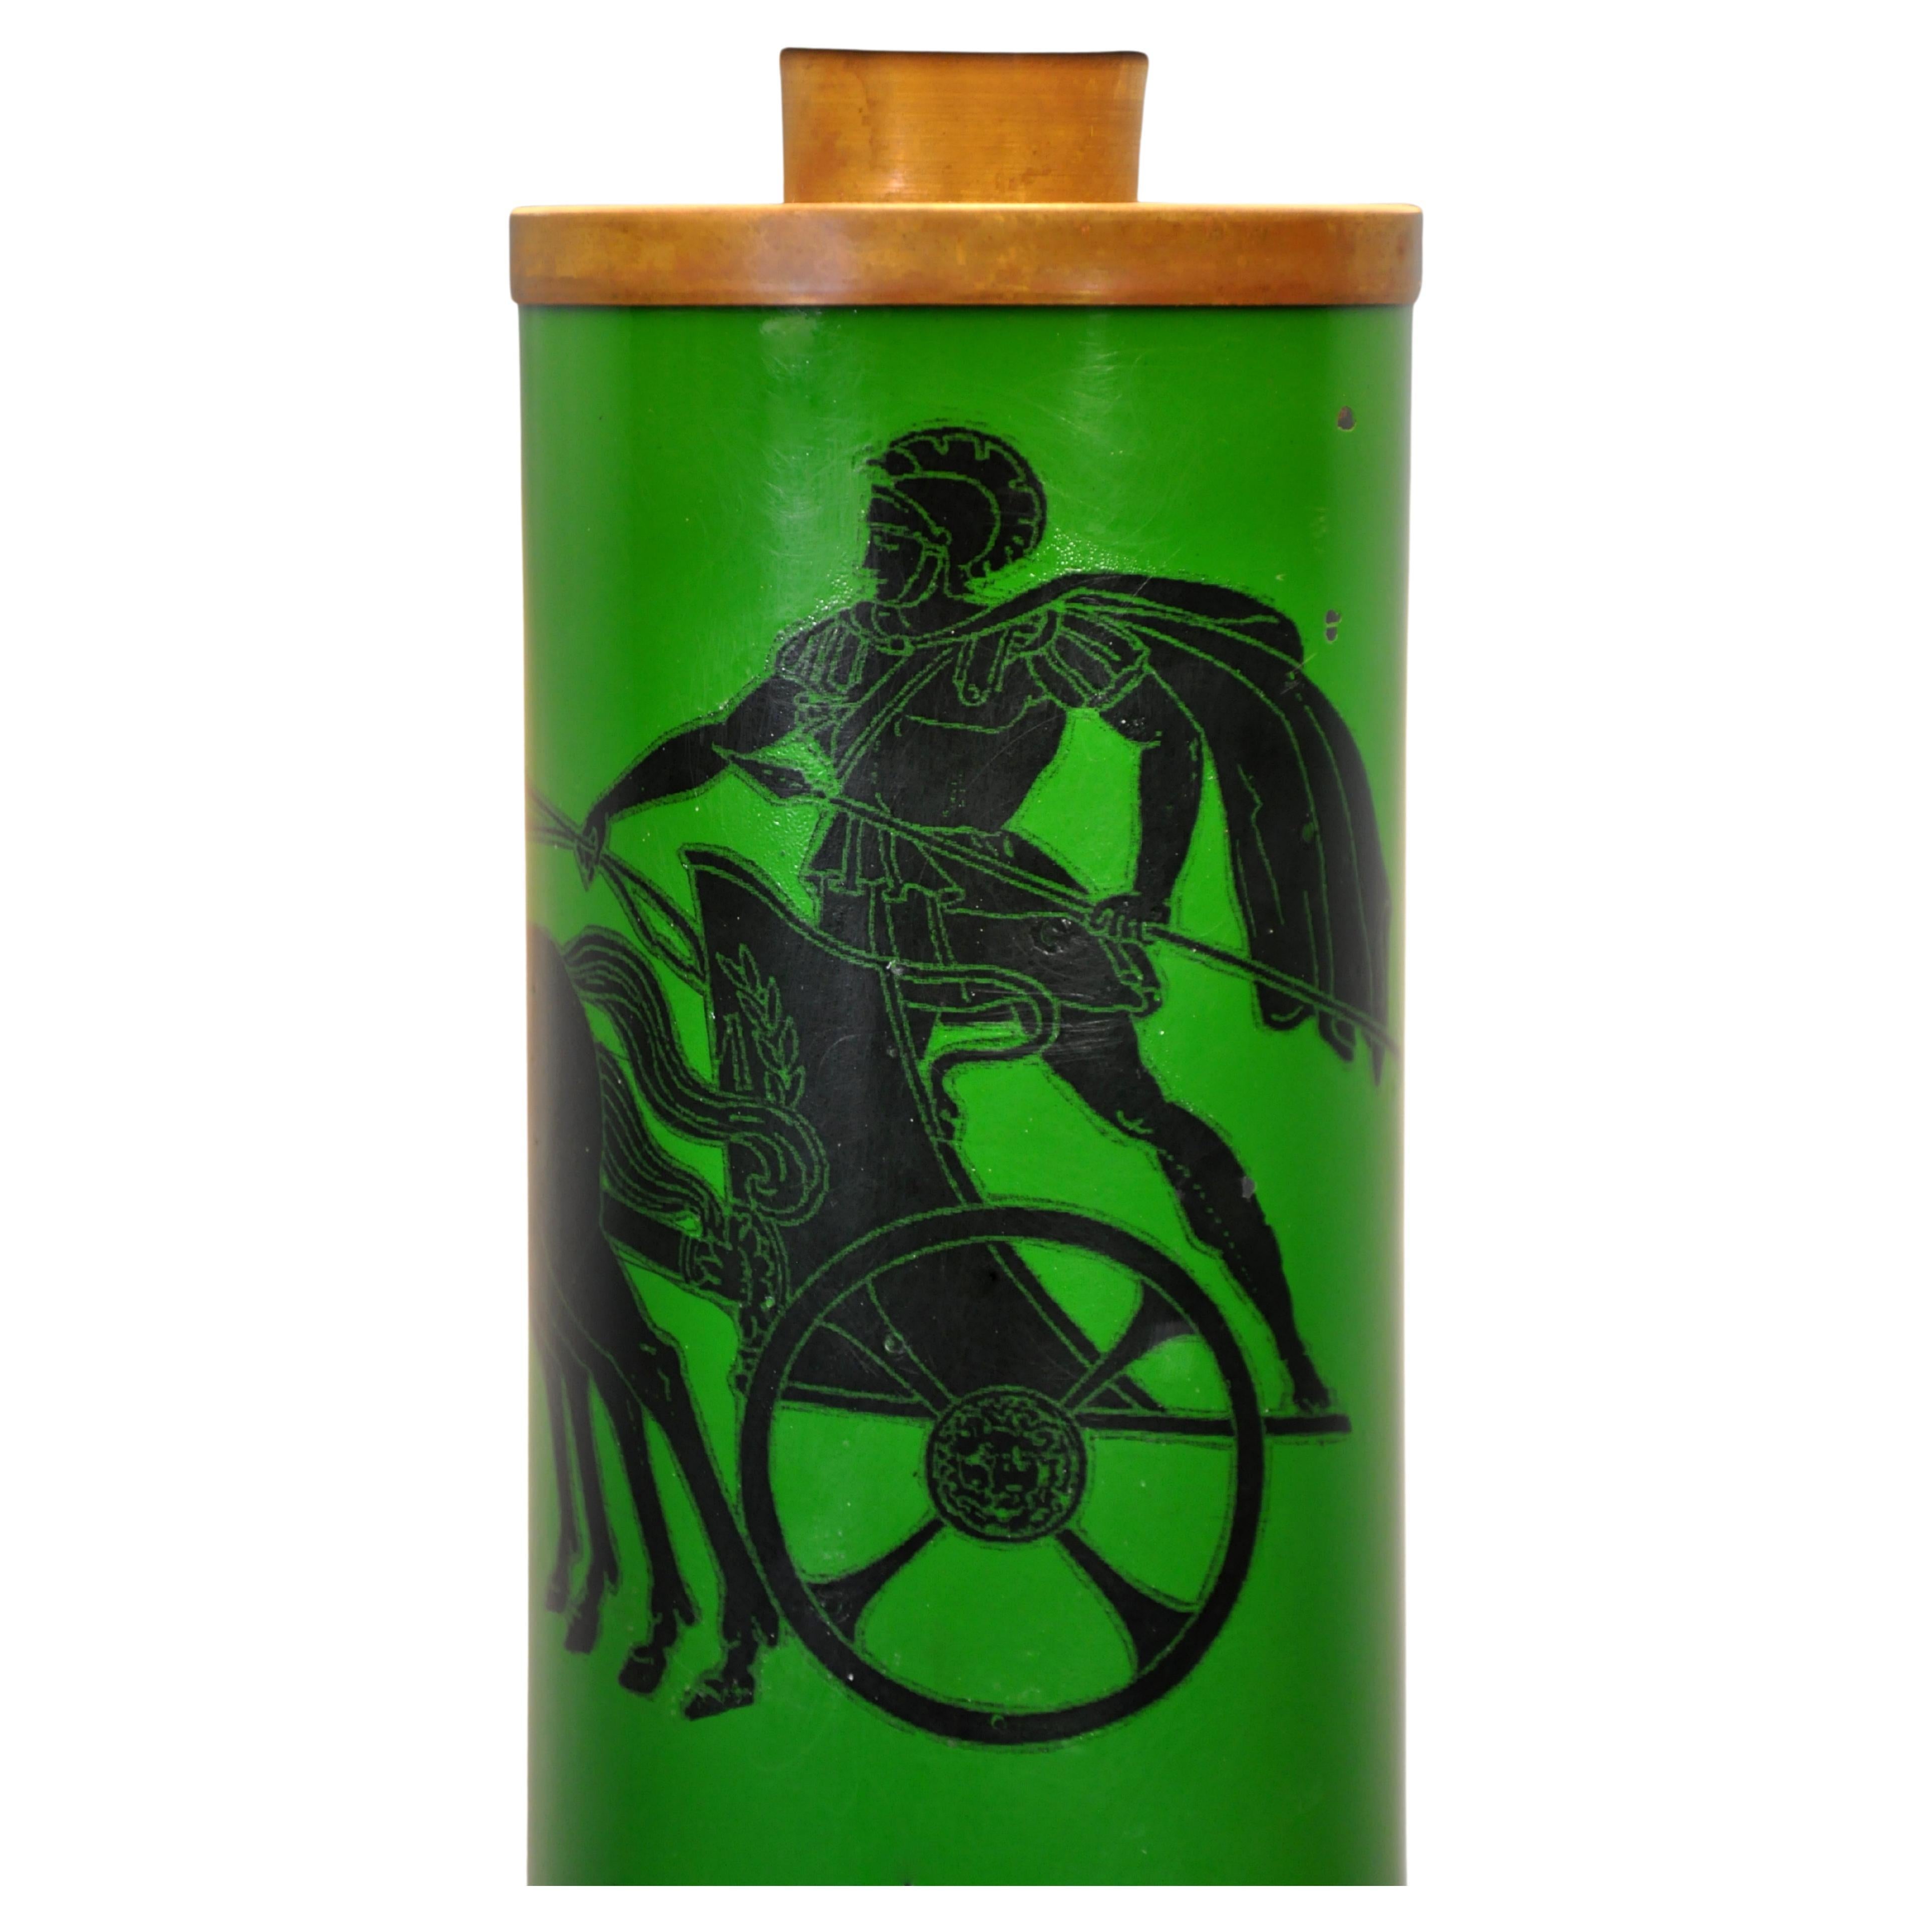 A vintage Mid-Century Modern lamp by Piero Fornasetti, the Italian master celebrated for his playful and surreal self-expression. Its striking green body showcases Neoclassical style screen-printed motifs of gladiators on chariots with horses. With